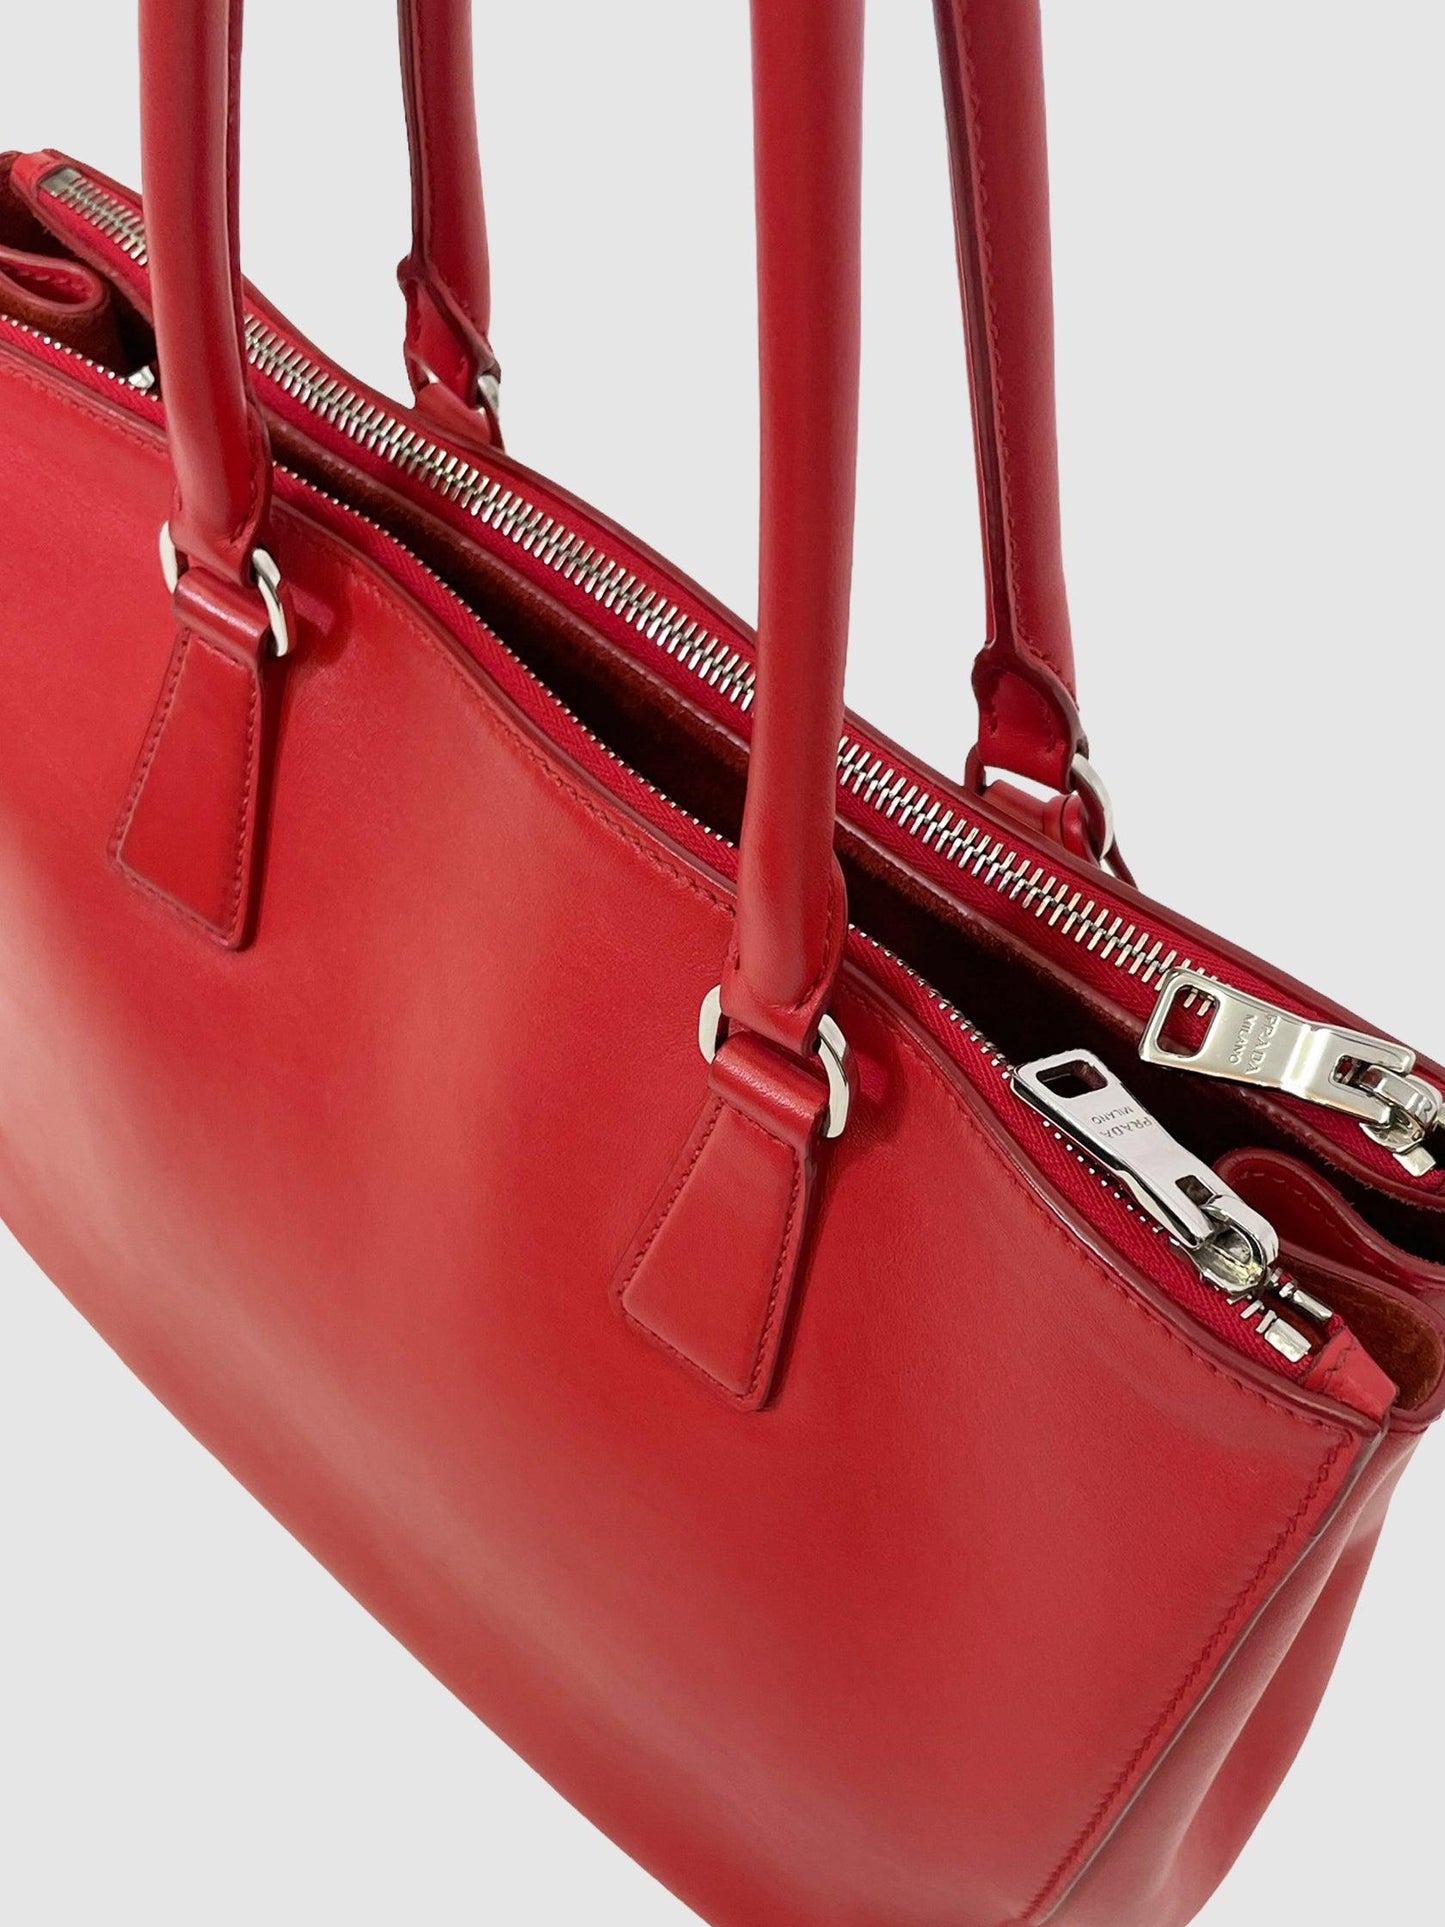 Prada Red Lux Large Double Zip Galleria Tote - Second Nature Boutique